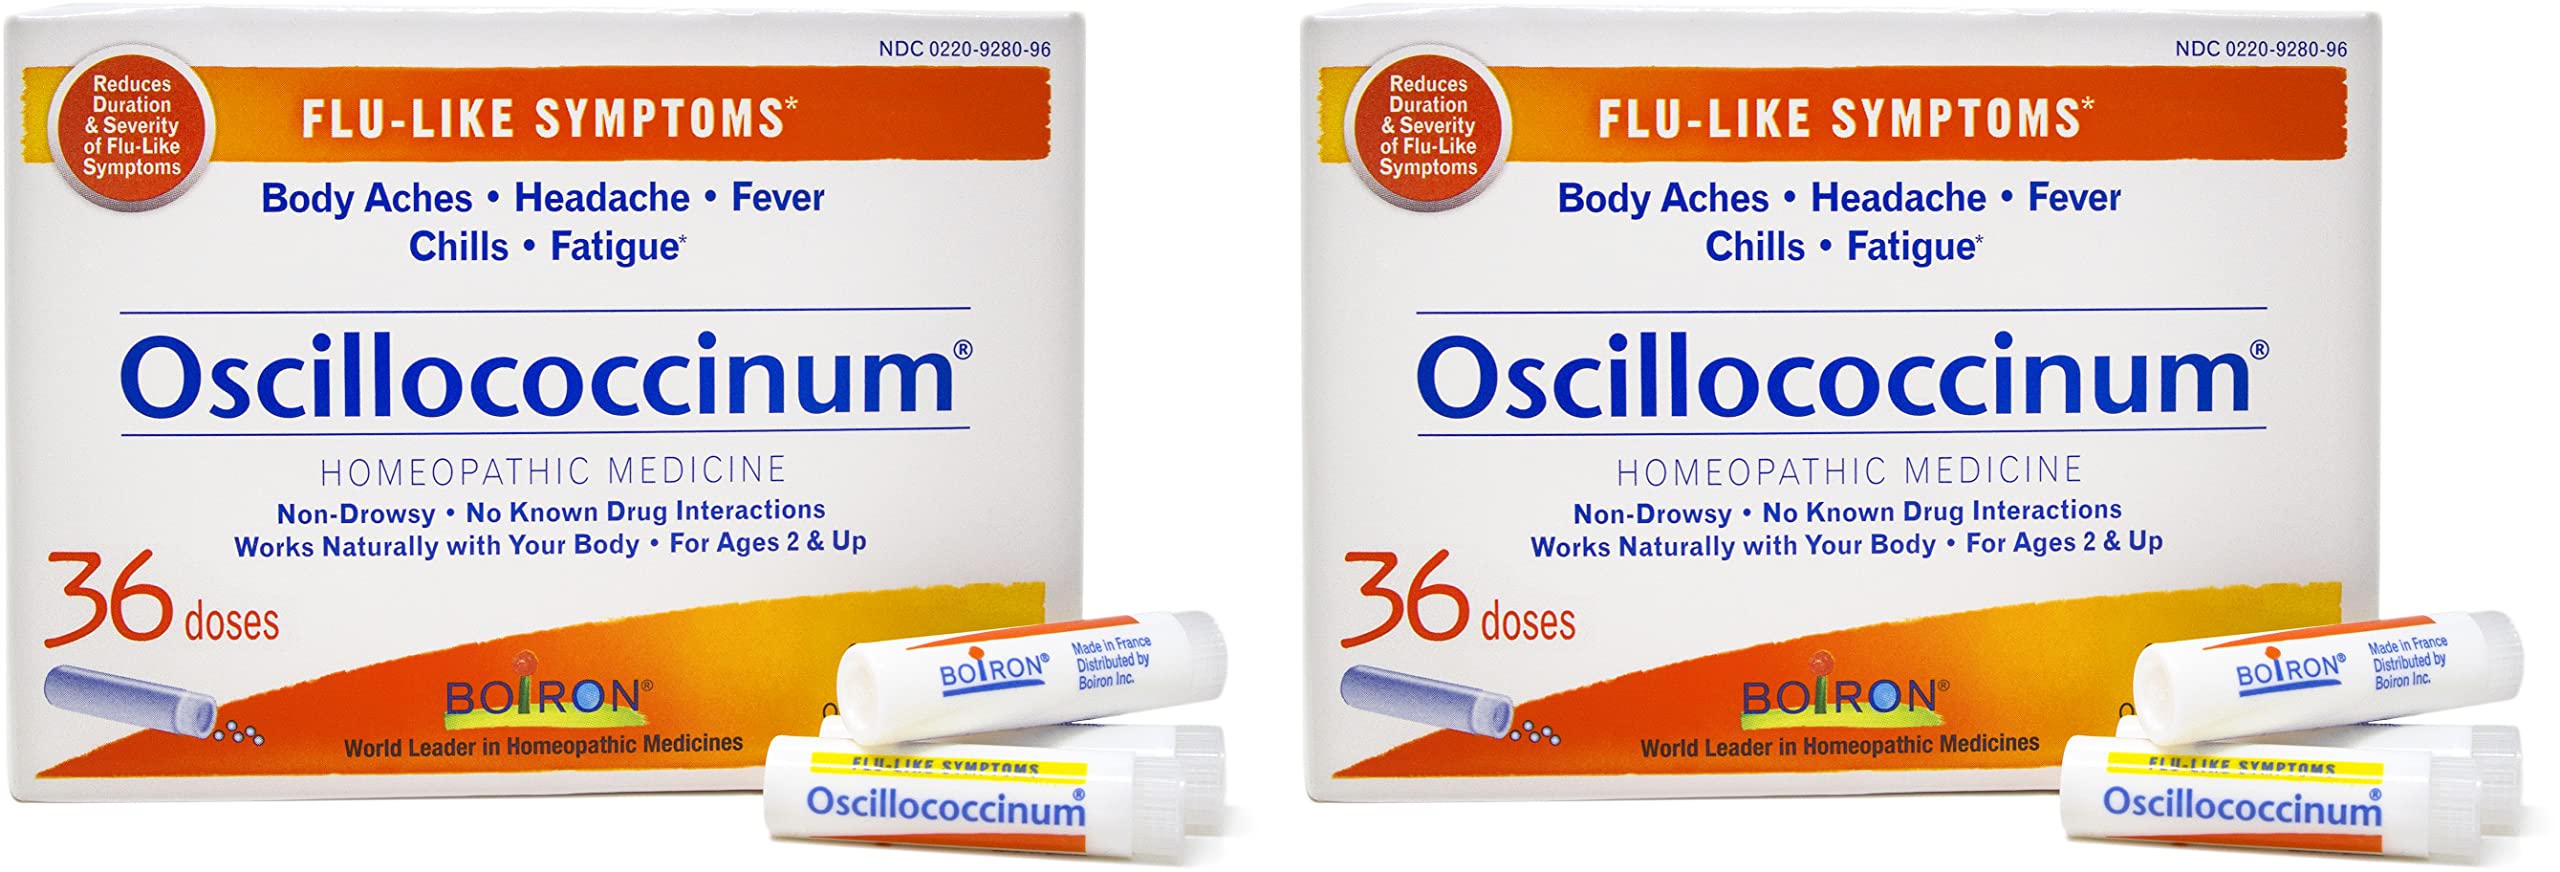 Boiron Oscillococcinum 72 Doses Homeopathic Medicine for Flu-Like Symptoms (2 Packs of 36)